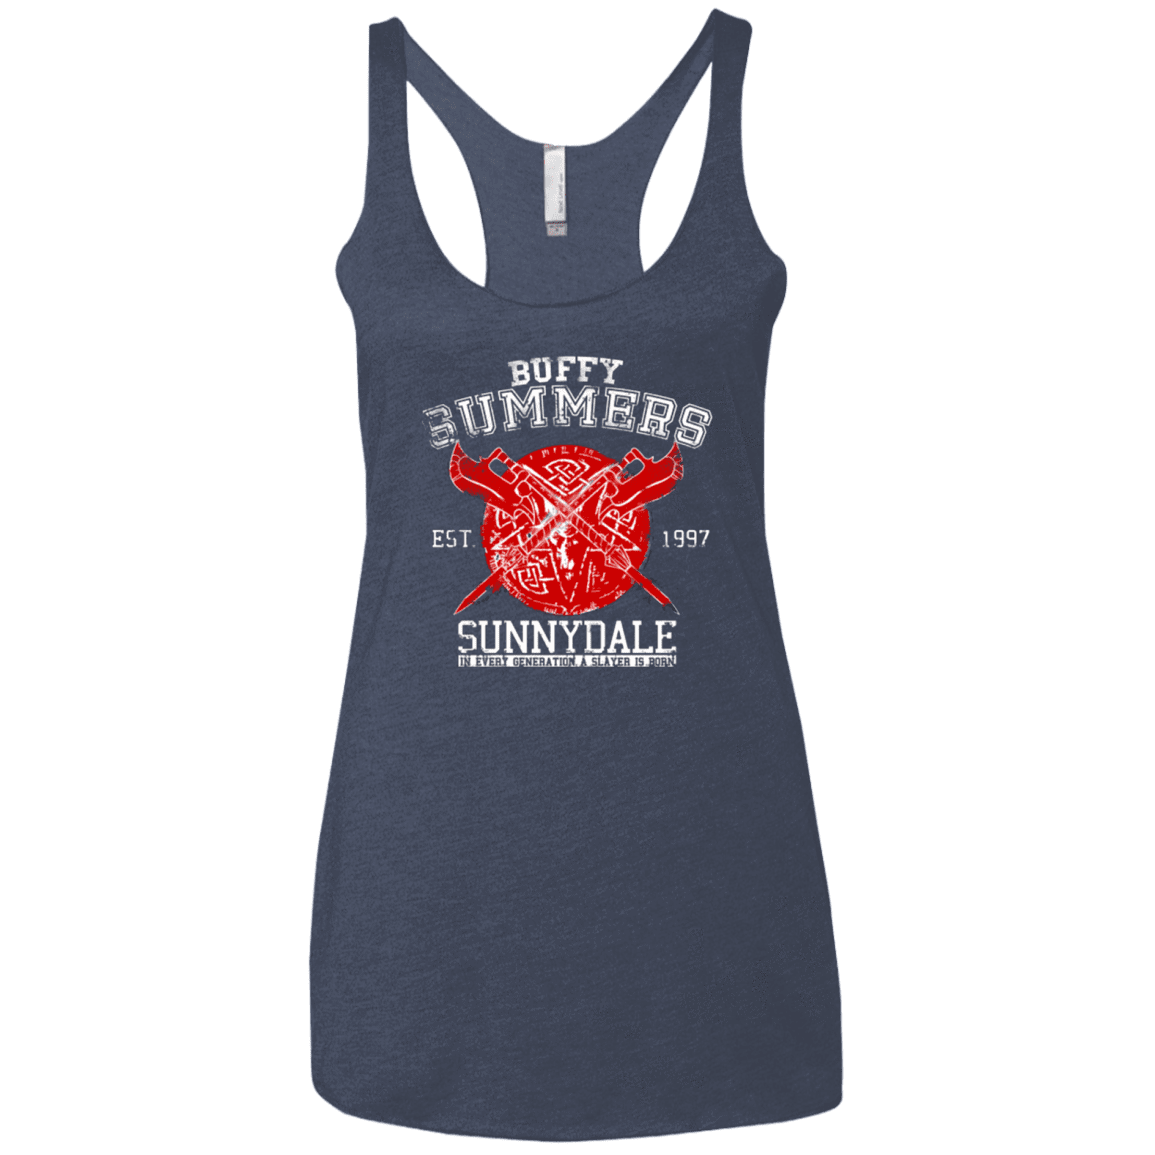 T-Shirts Vintage Navy / X-Small 1 in Every Generation Women's Triblend Racerback Tank